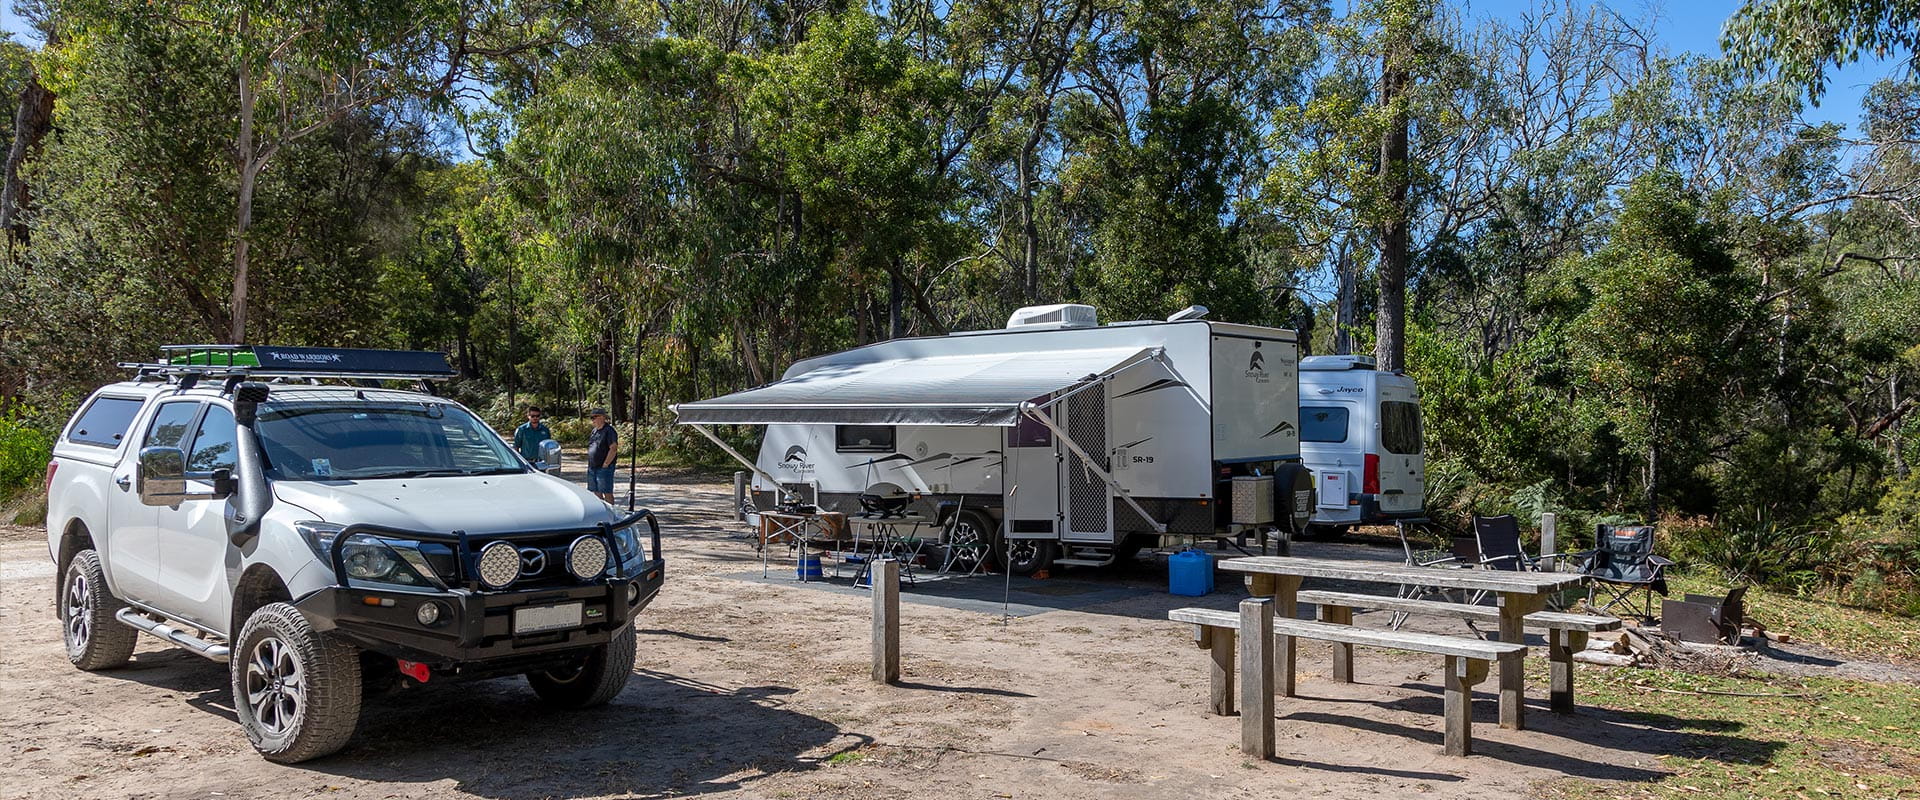 A white ute parked next to two white caravans.